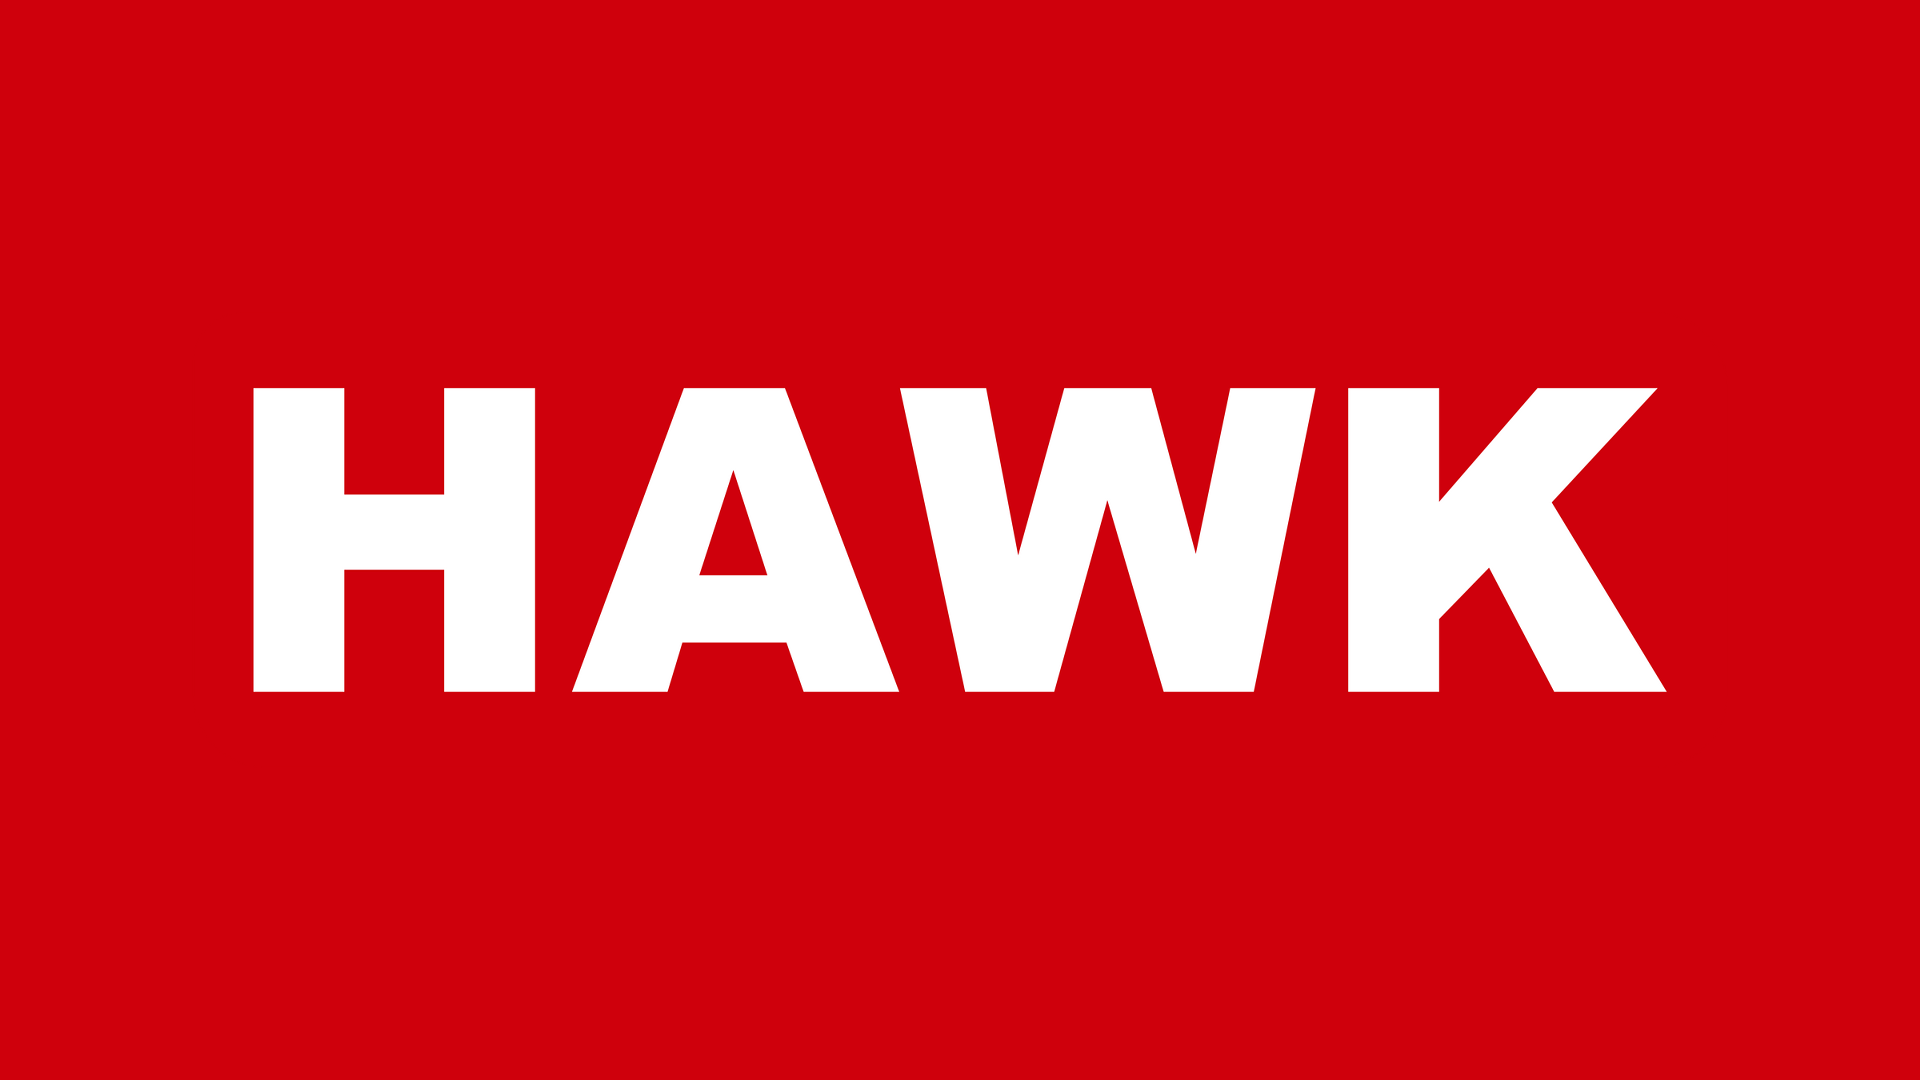 The word hawk is on a red background